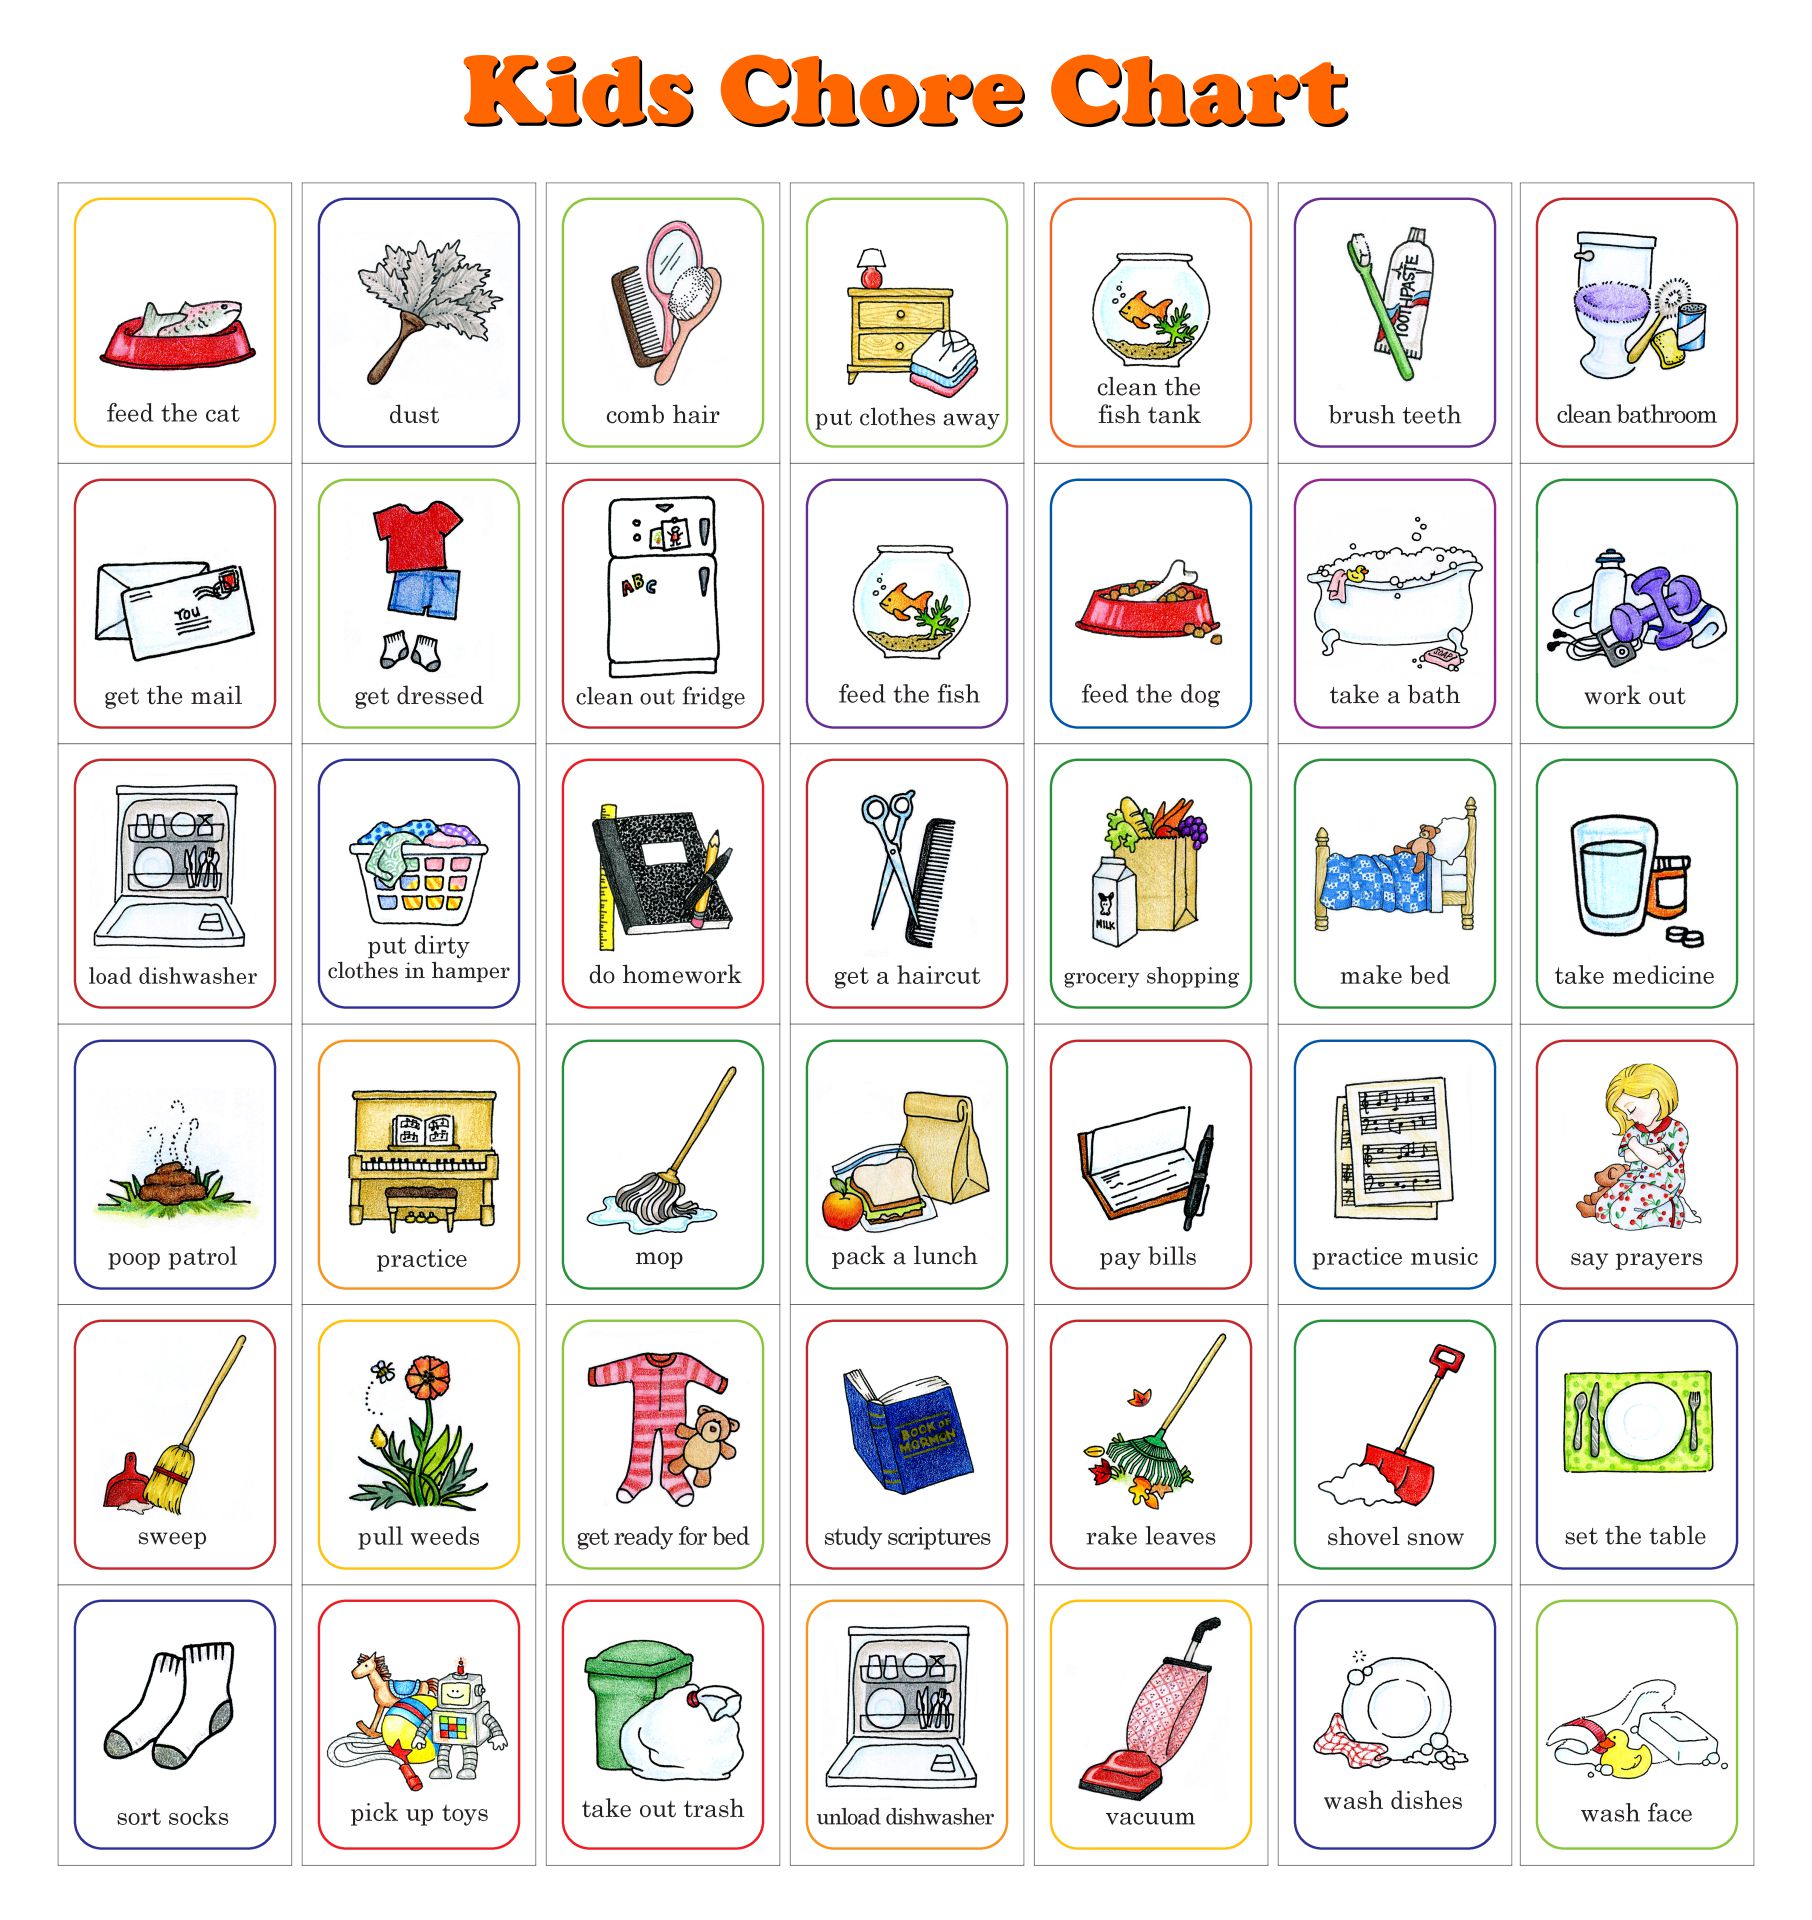 chores-for-kids-clipart-free